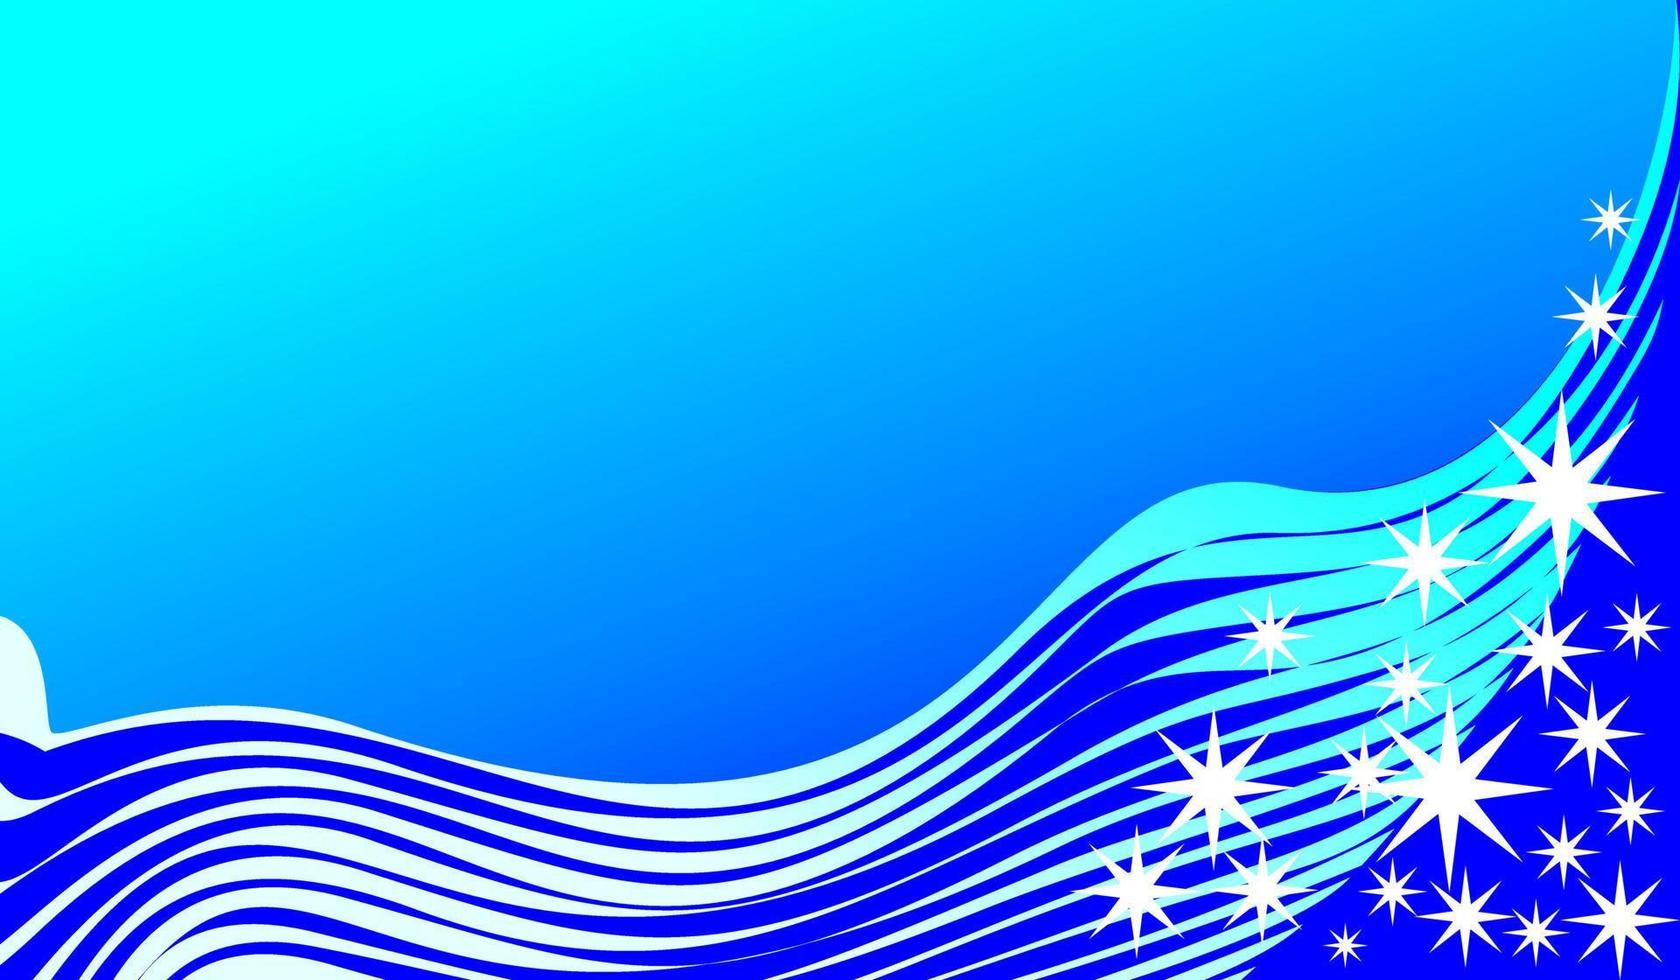 Colorful abstract background waves and starlight, cool and simple vector illustration